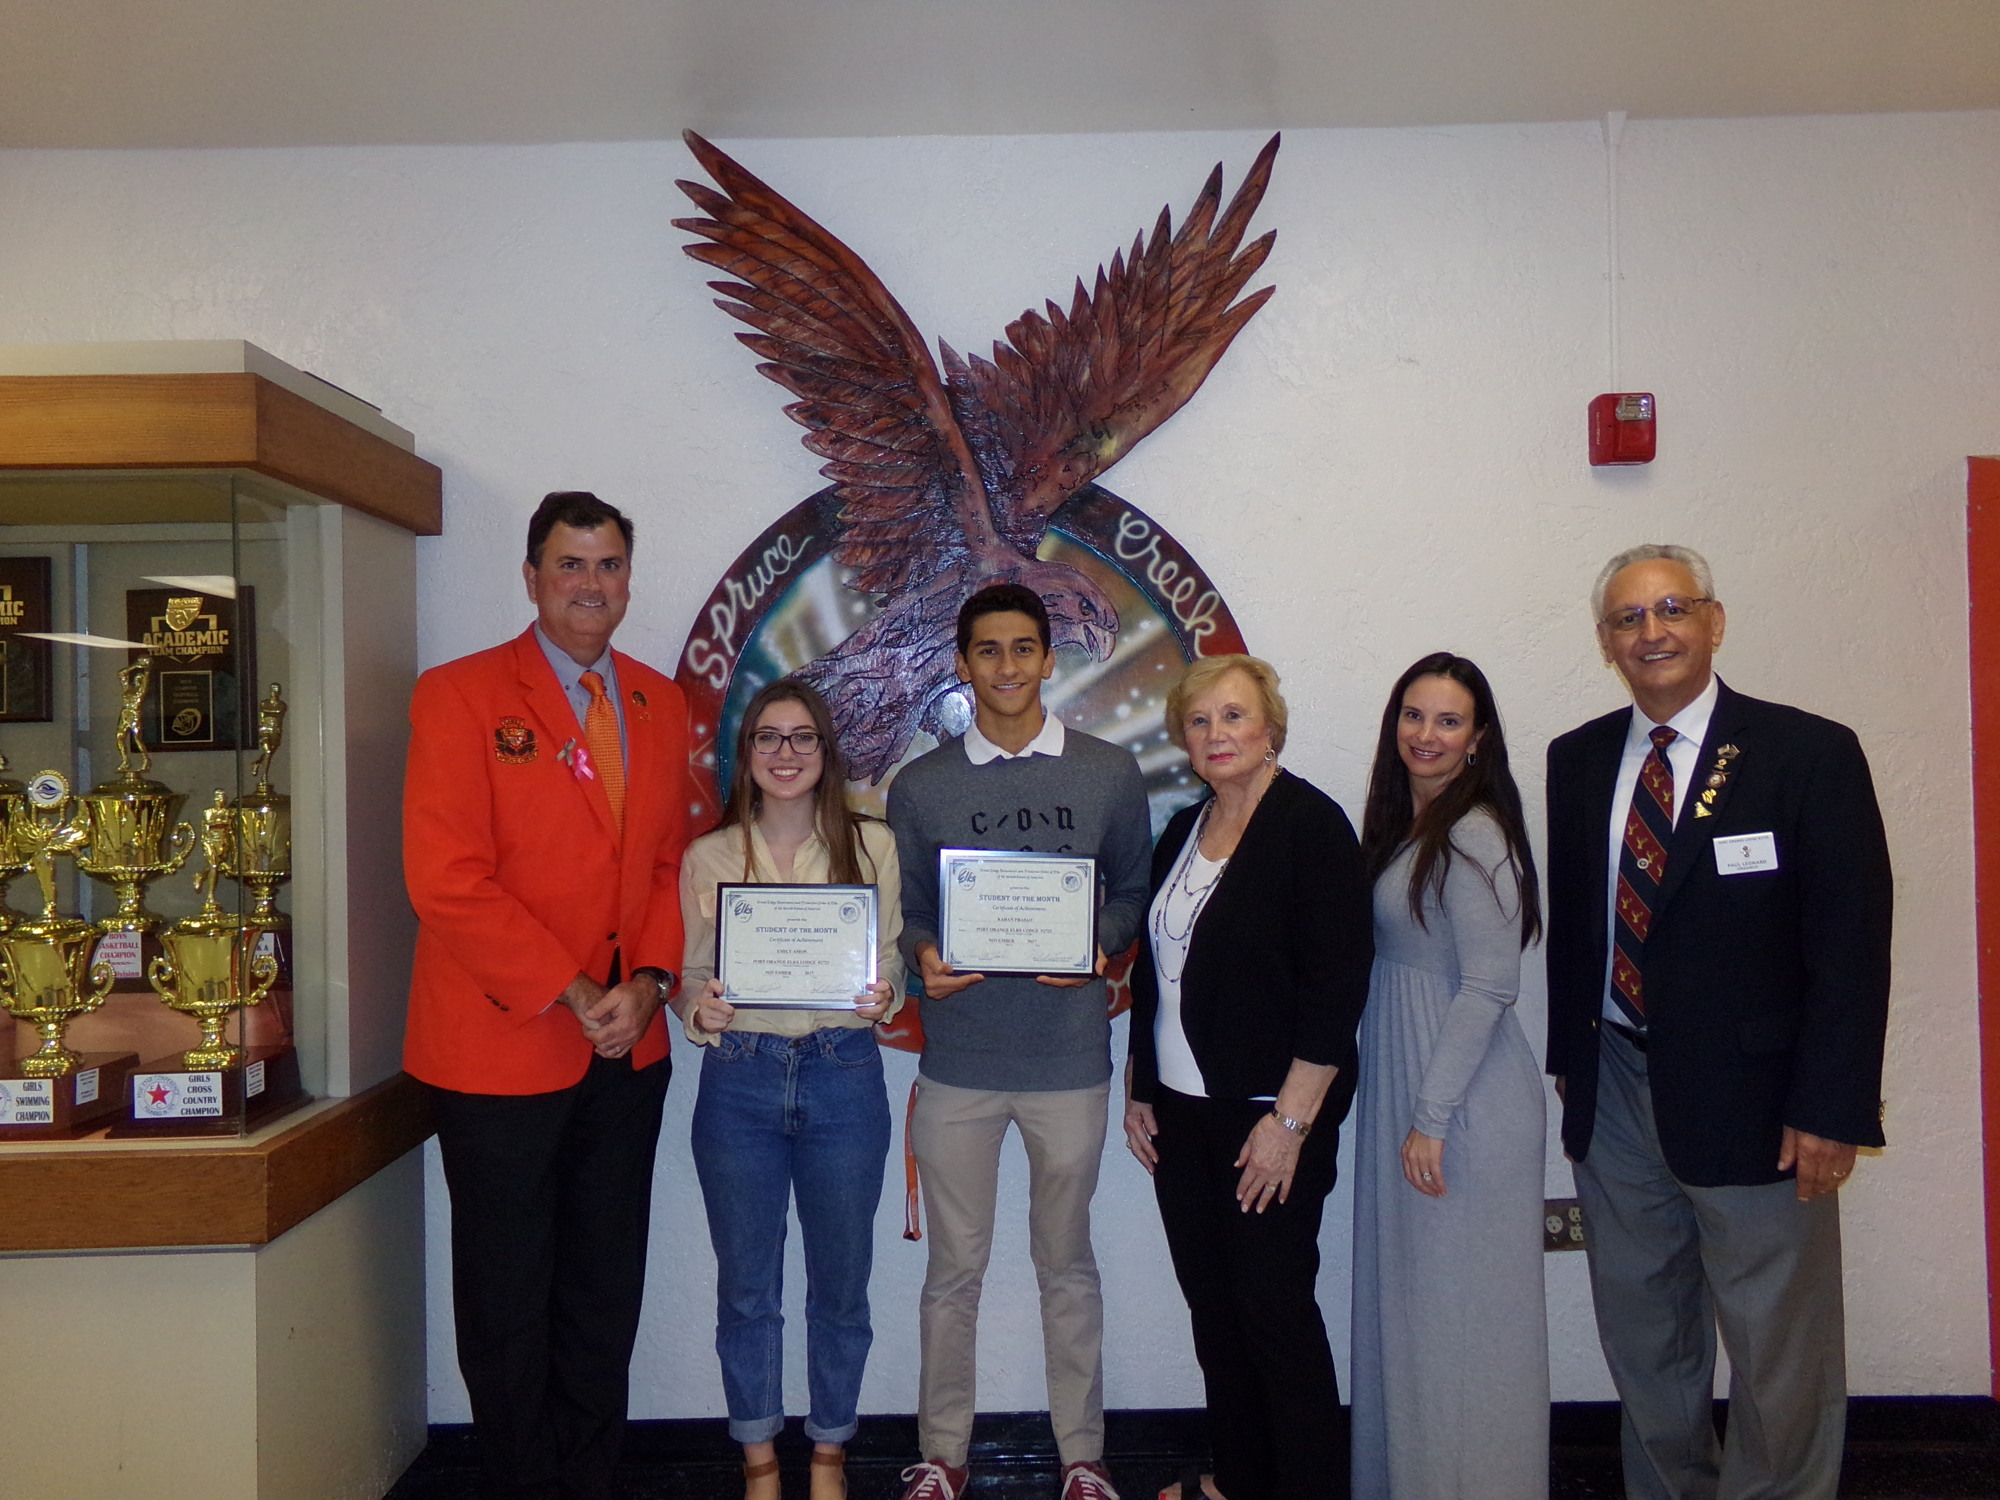 Principal Todd Sparger, Emily Amo, Karan Prasad, Lodge Scholarship Committee Member Louise Lauthain, Guidance Counselor Karie Cappiello and Lodge Scholarship Chairman Paul Leonard. Photo courtesy of the Elks Lodge